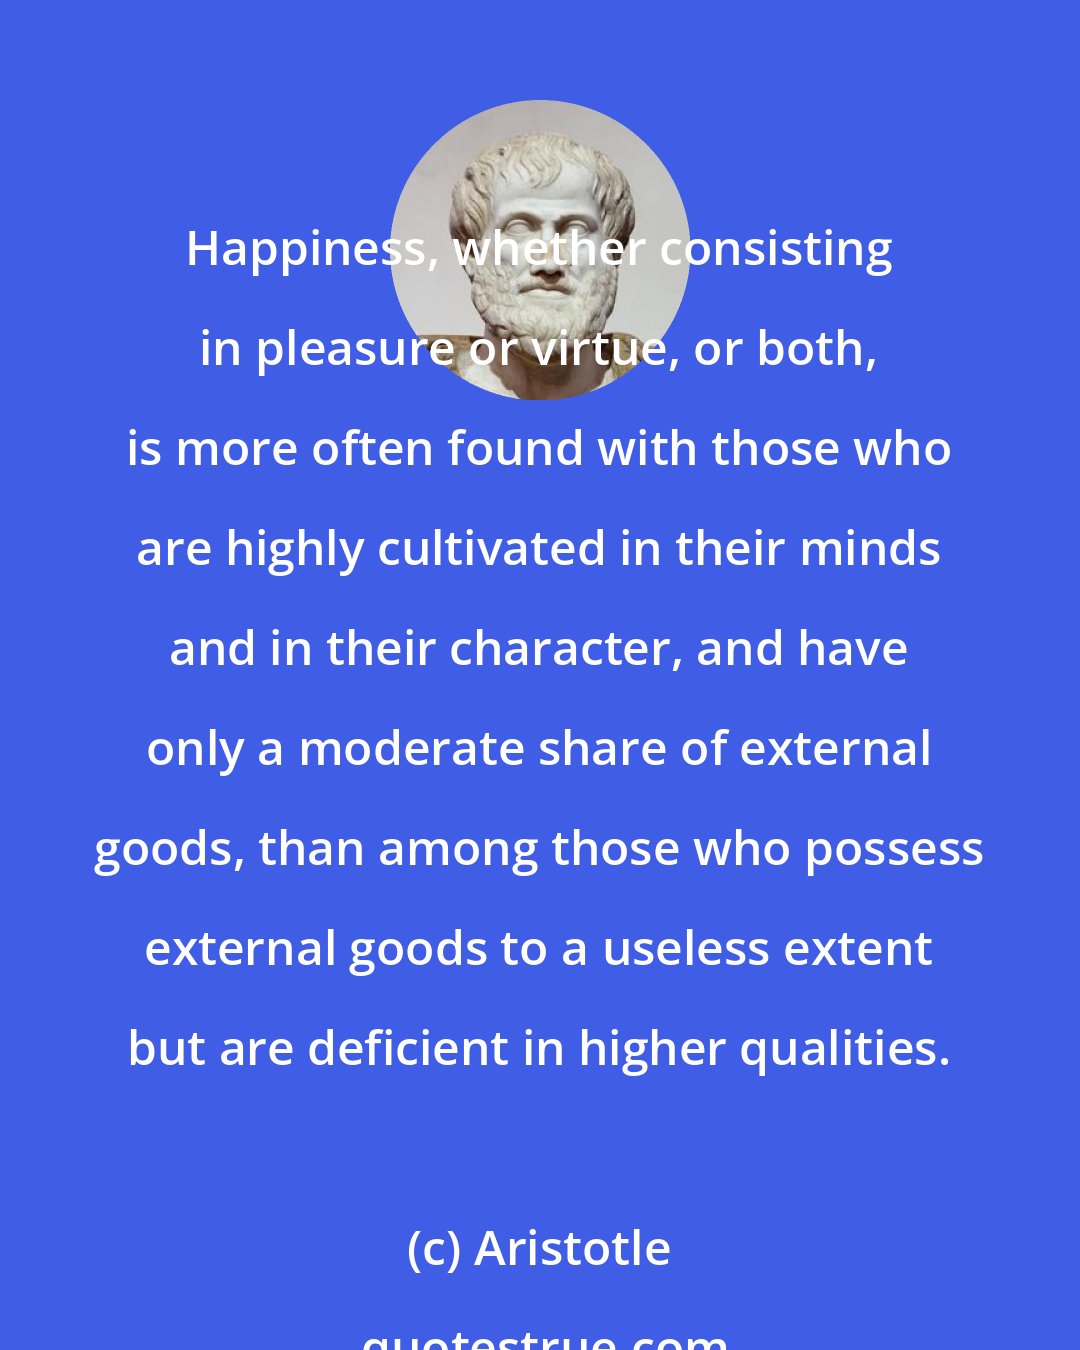 Aristotle: Happiness, whether consisting in pleasure or virtue, or both, is more often found with those who are highly cultivated in their minds and in their character, and have only a moderate share of external goods, than among those who possess external goods to a useless extent but are deficient in higher qualities.